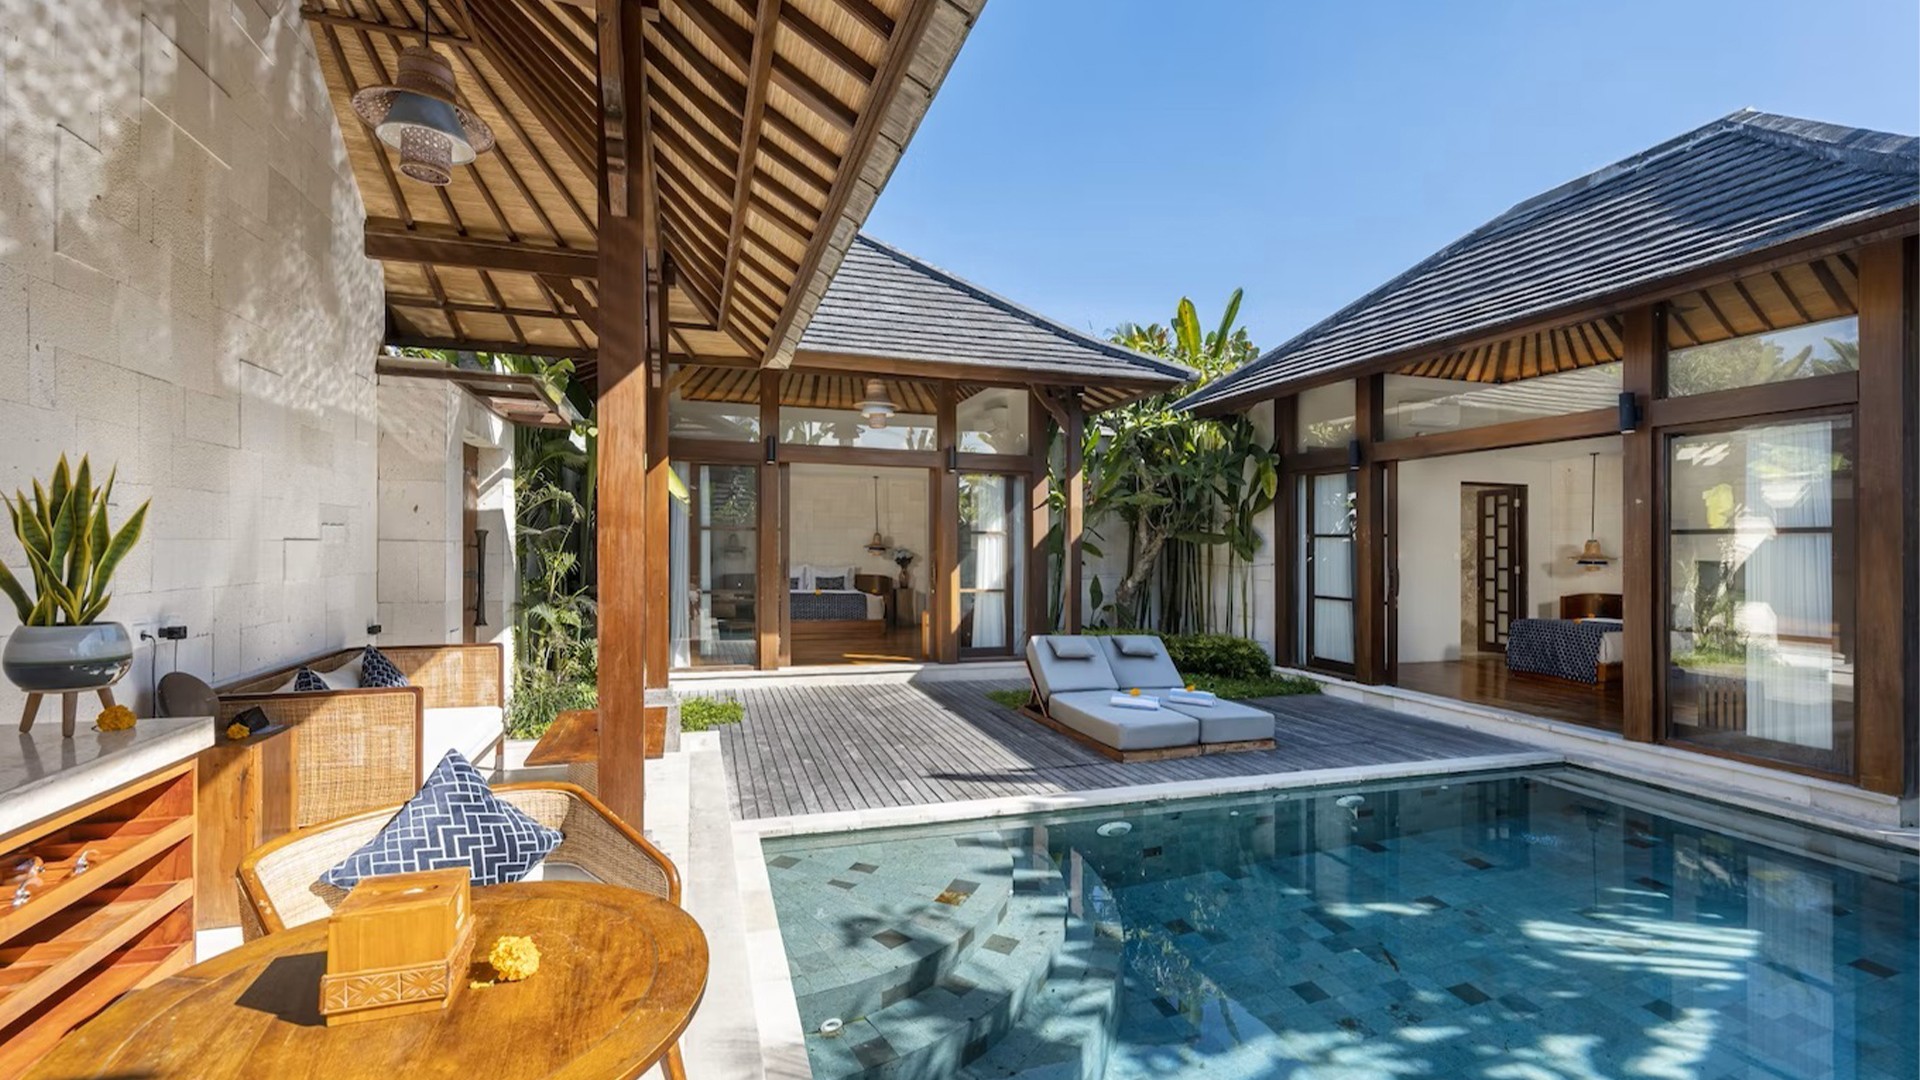 Royal Two Bedroom Villa with Private Pool and Jacuzzi